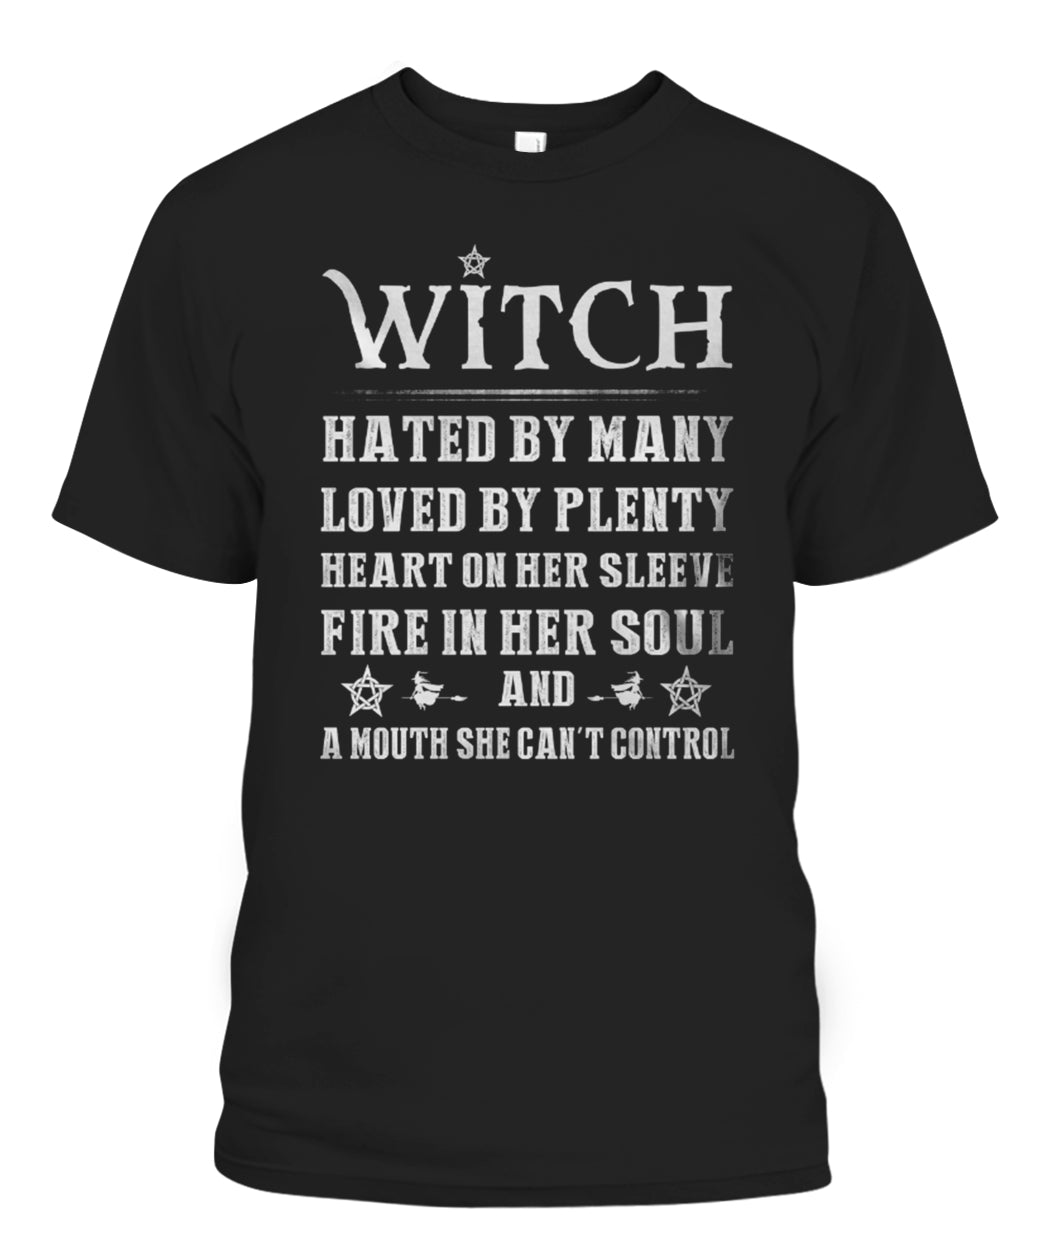 Witch Tshirt Witch Hated by Many Loved by Plenty Heart On Her Sleeve Fire In Her Soul and A Mouth She Cant Control-MoonChildWorld